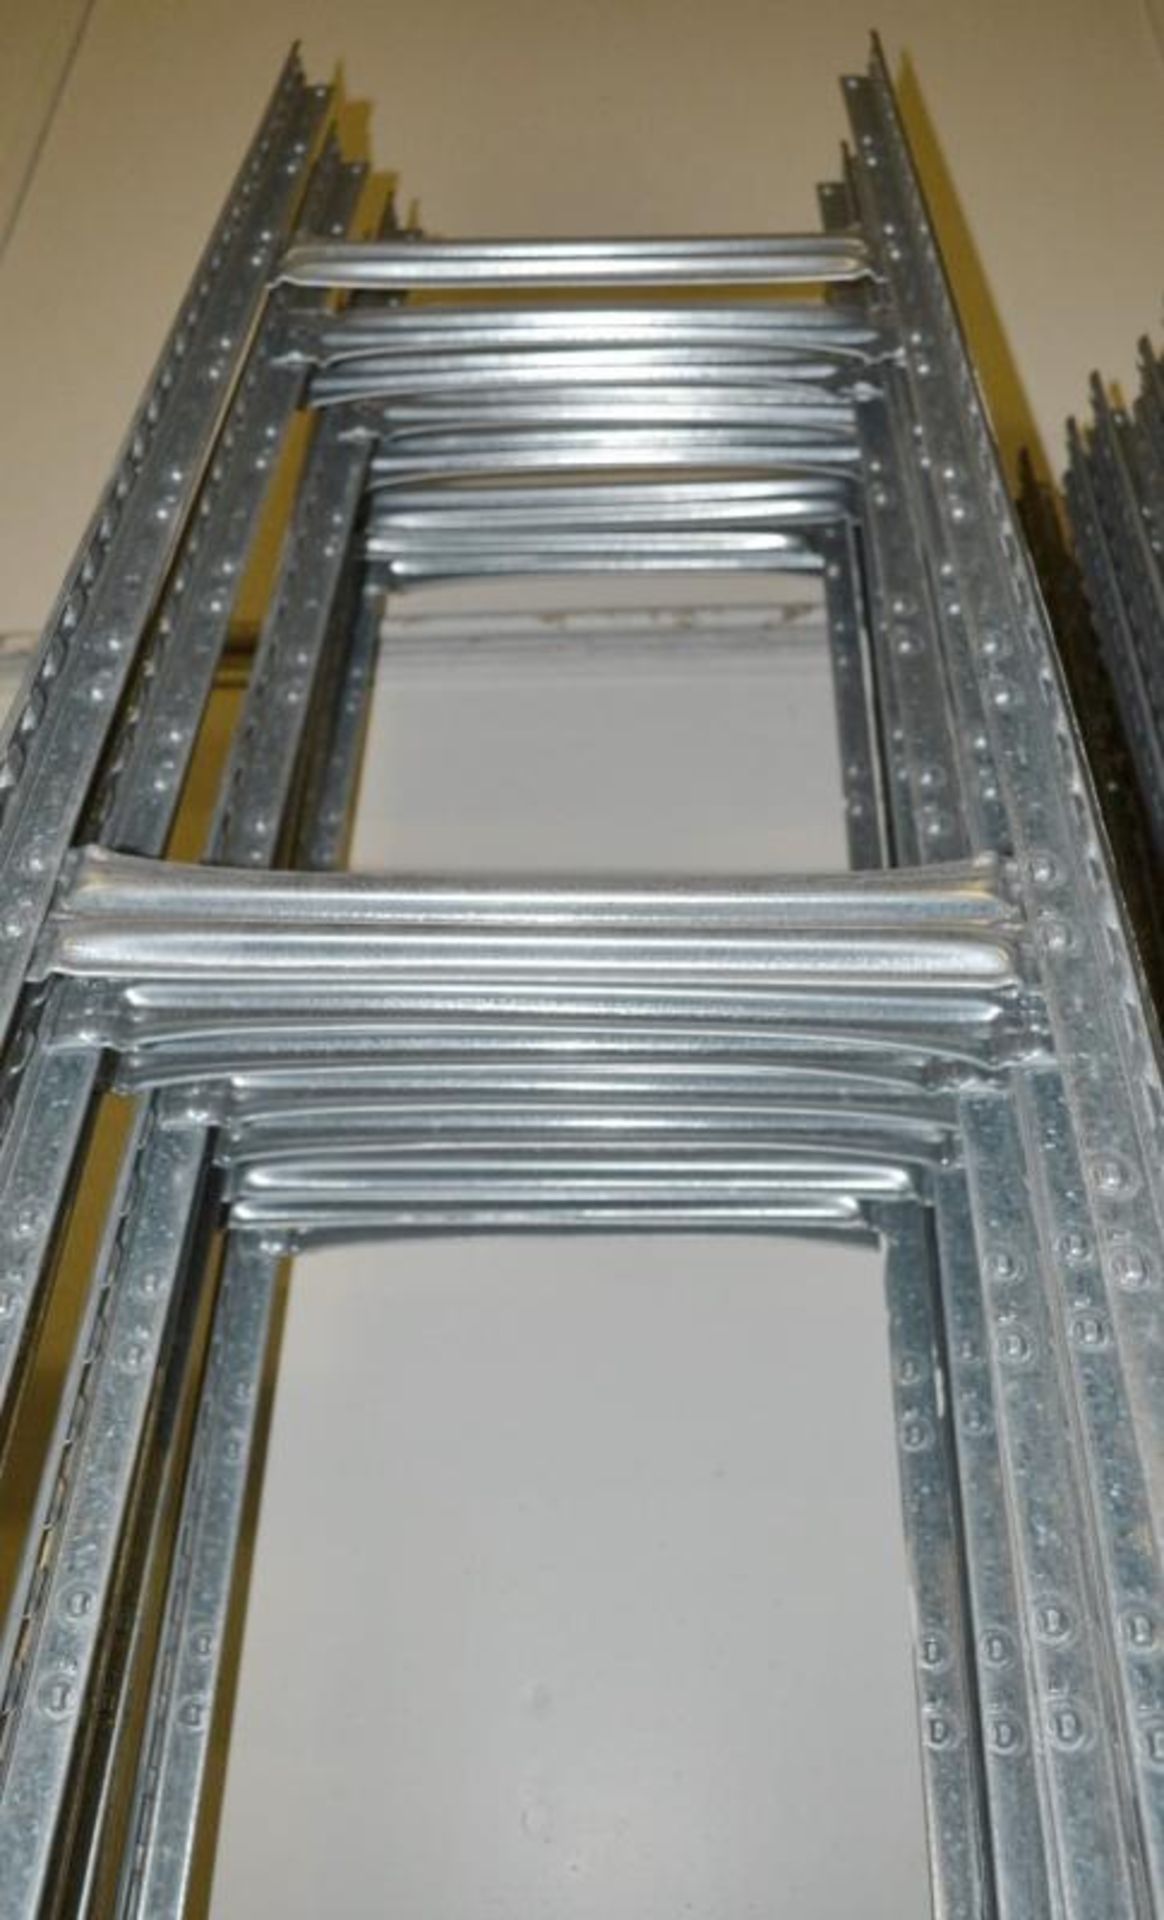 4 x Bays of Metalsistem Steel Modular Storage Shelving - Includes 37 Pieces - Recently Removed - Image 13 of 17